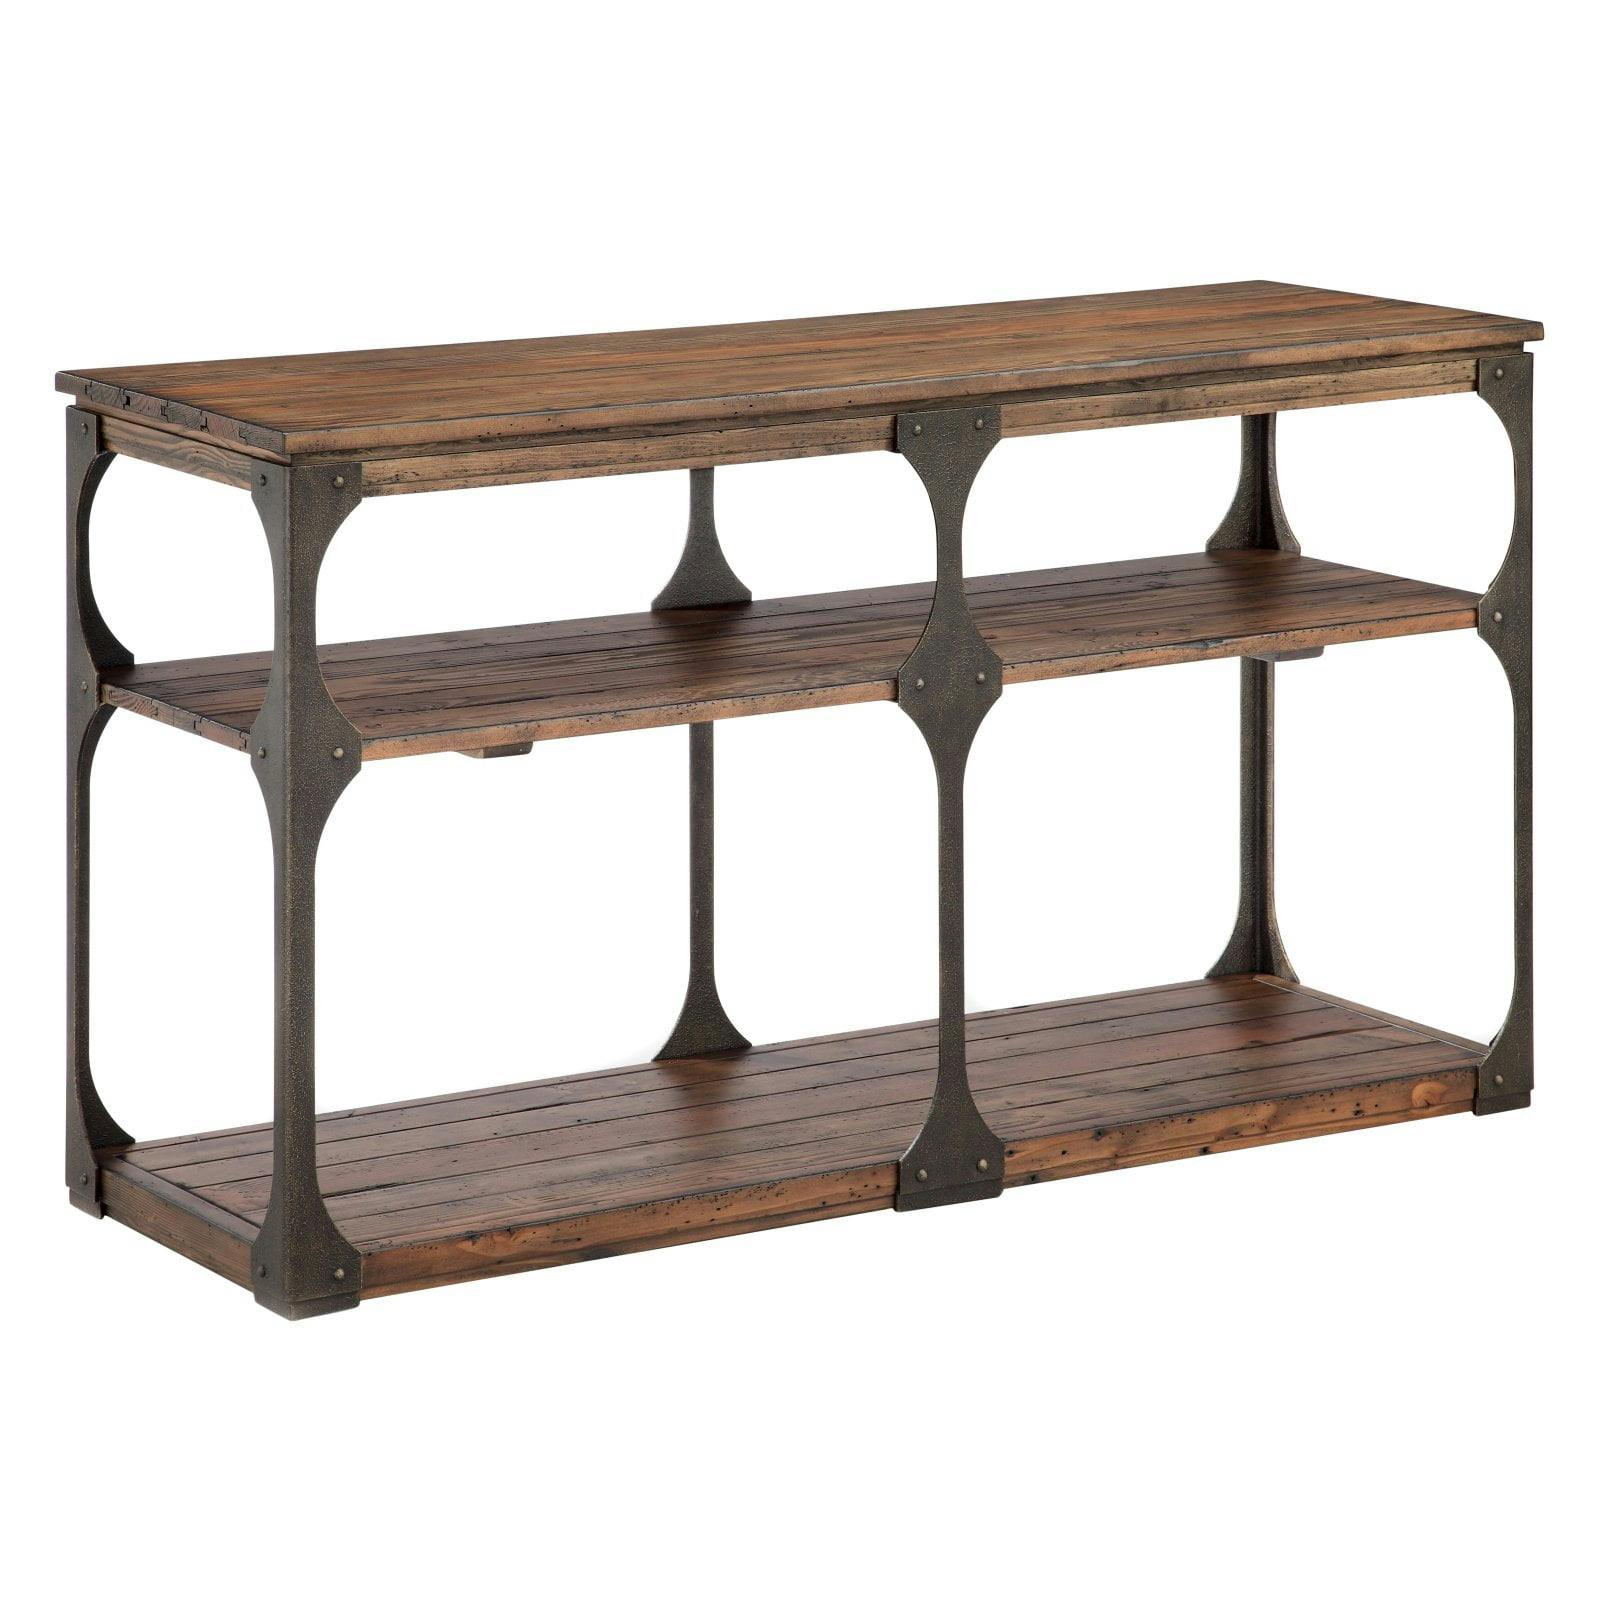 Bourbon Aged Iron 50" Industrial Console Table with Storage